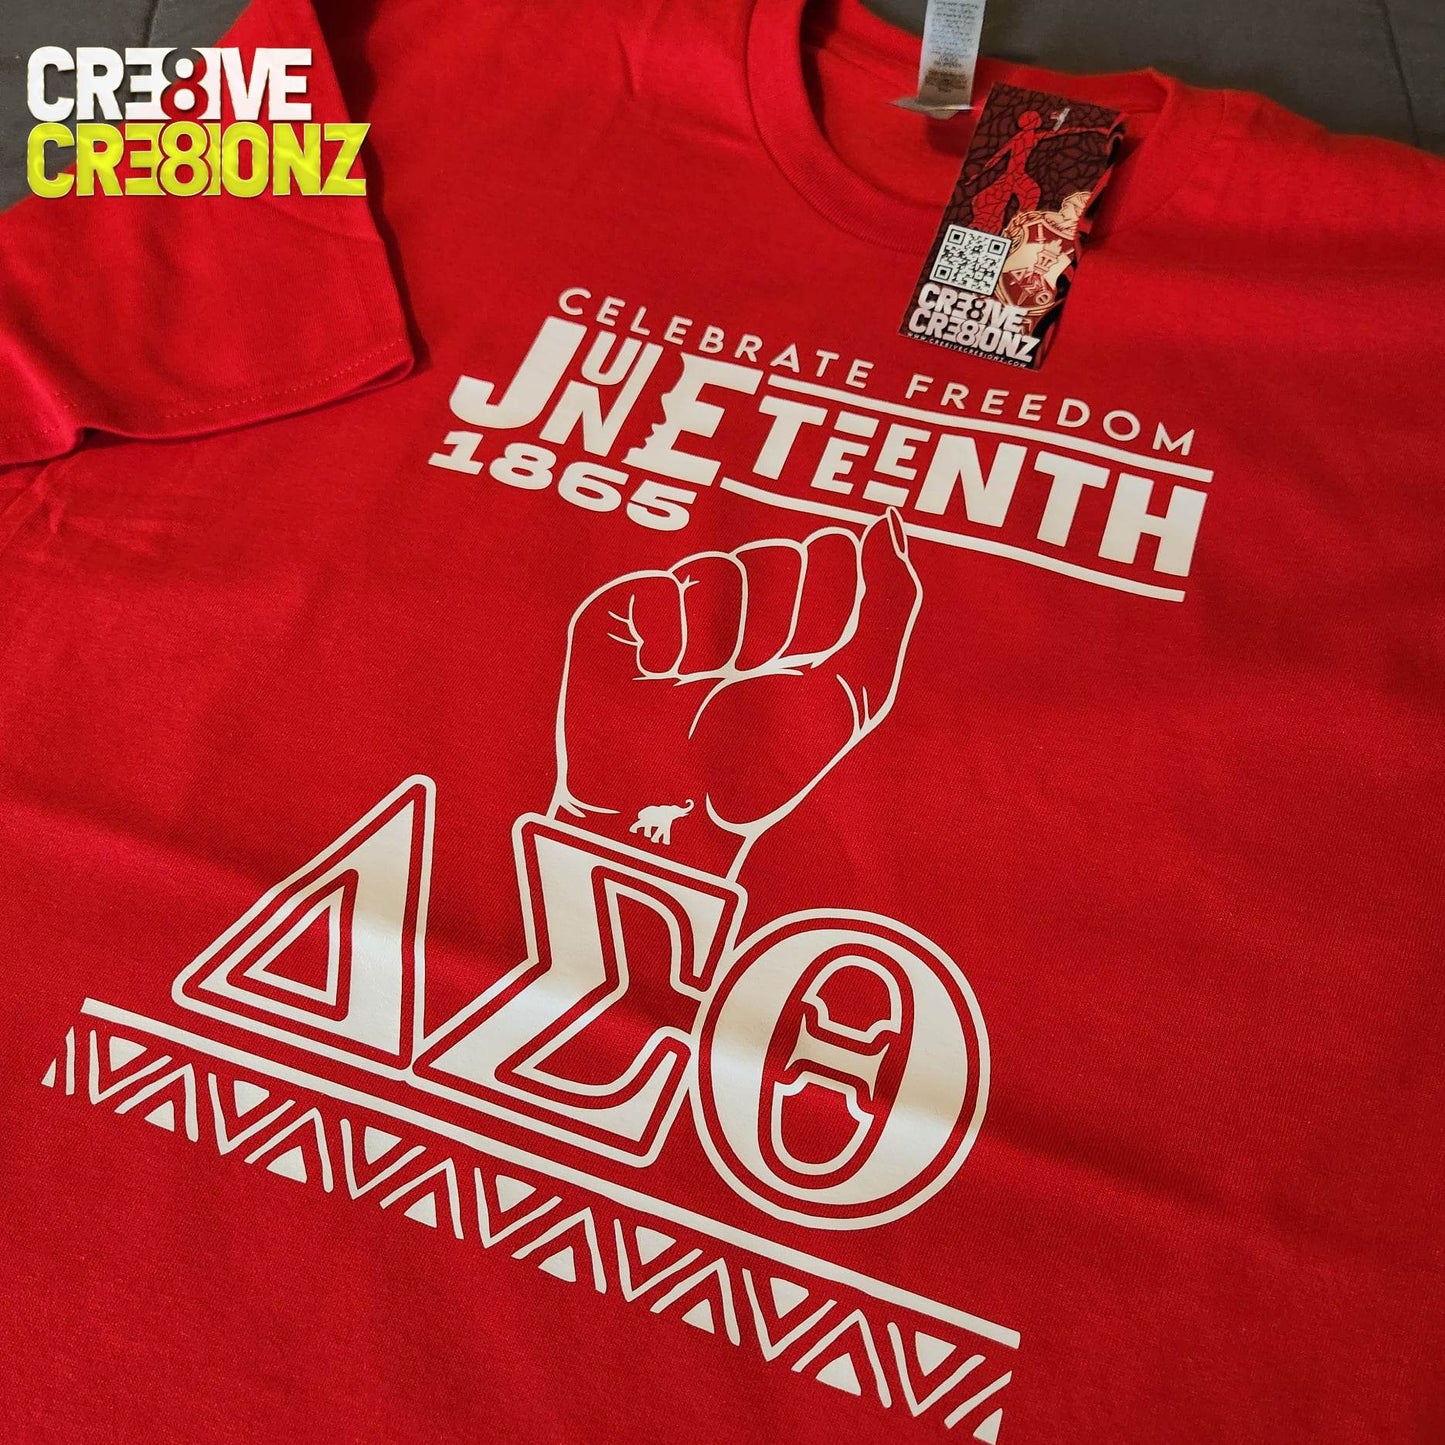 Juneteenth Delta Shirt - Cre8ive Cre8ionz